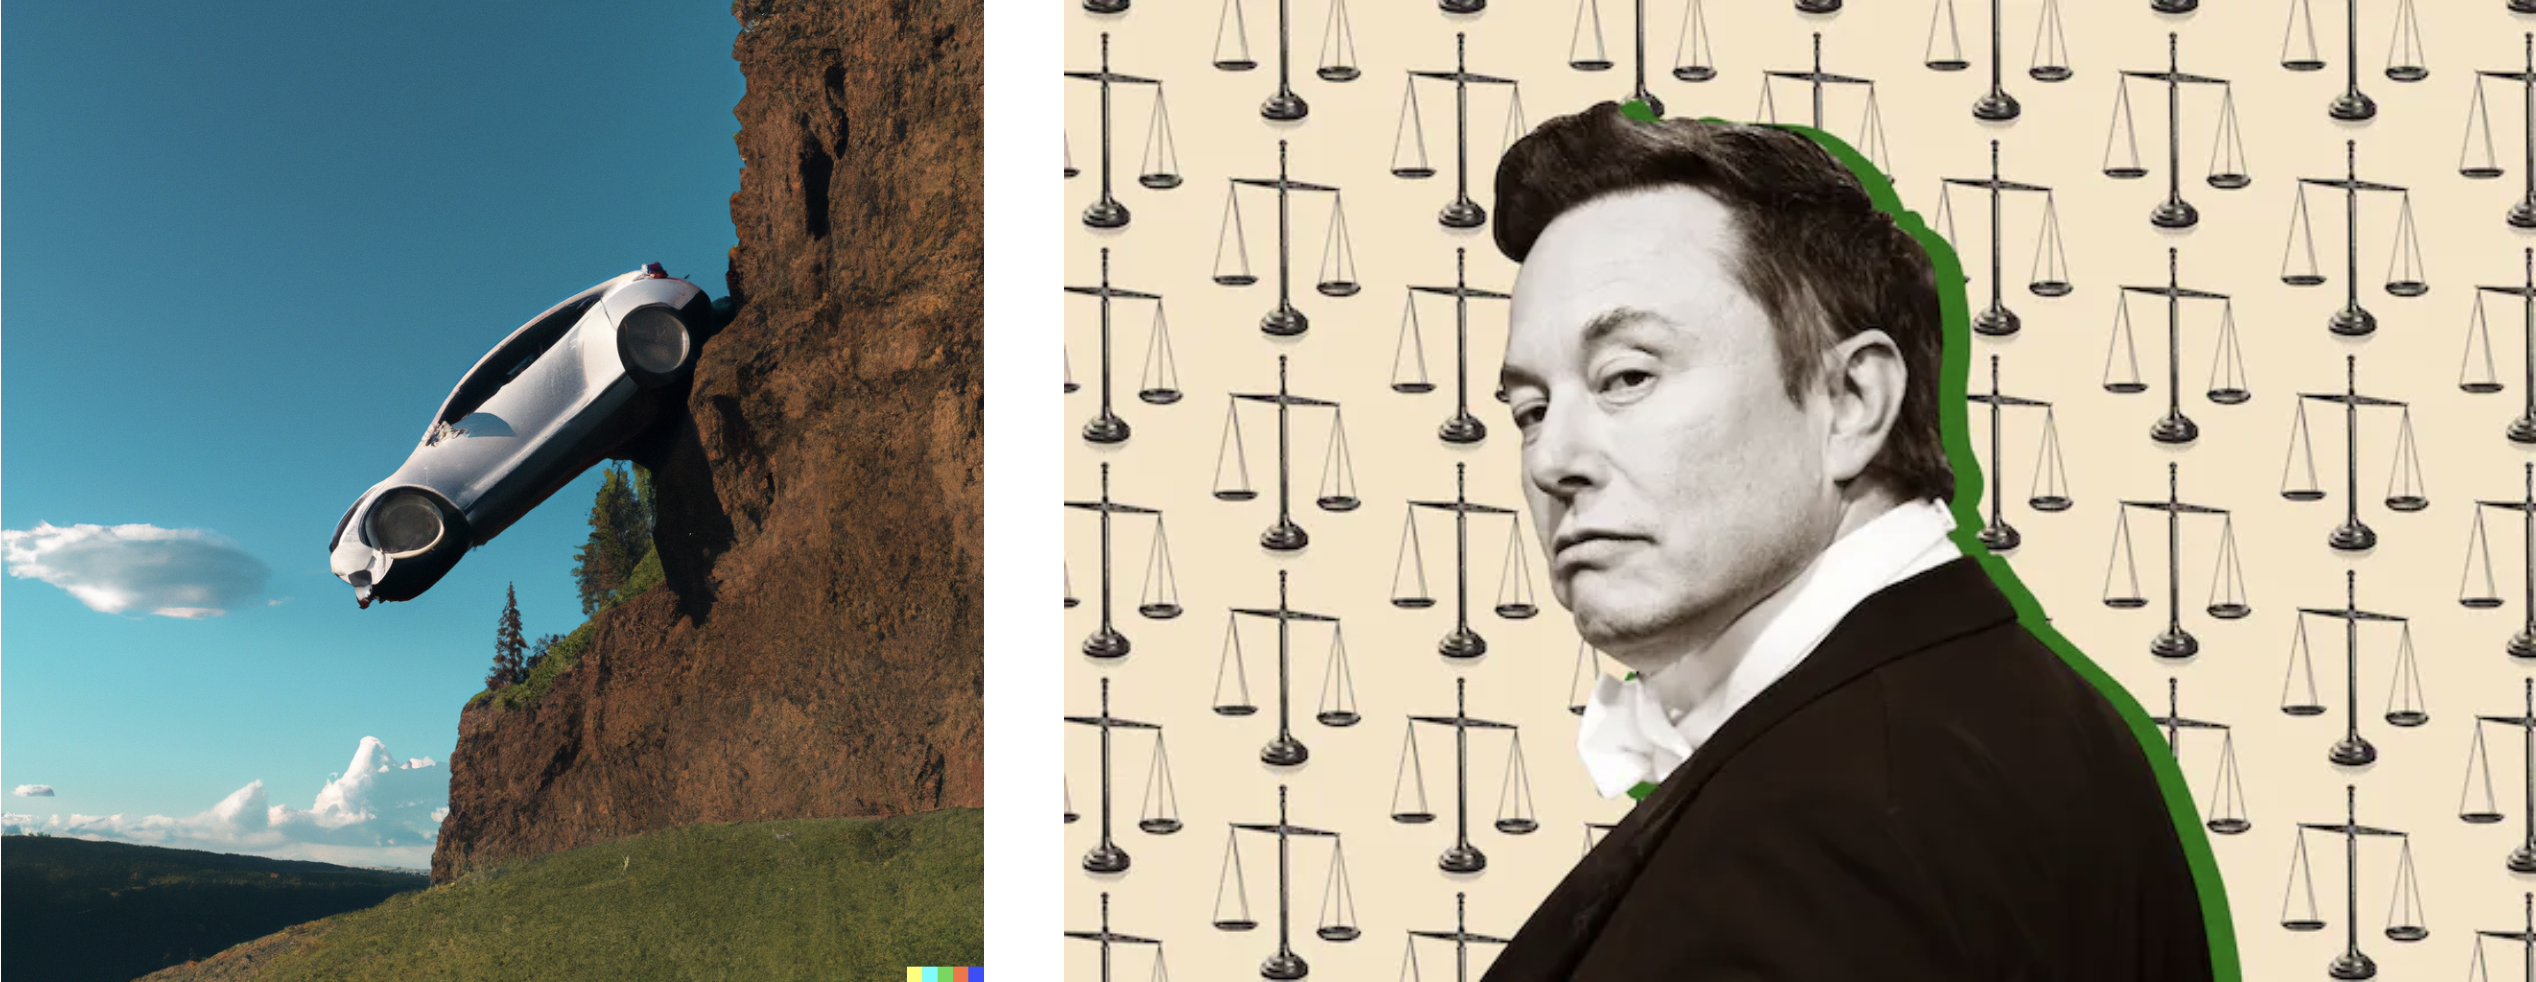 A comparison between two images. The image on the left is a faux-realstic depicition of a Tesla
     driving off a cliff. The image on the right is digital art of an image of Elon Musk
     superimposed over a wallpaper-like patterned background of old-fashinged scales.